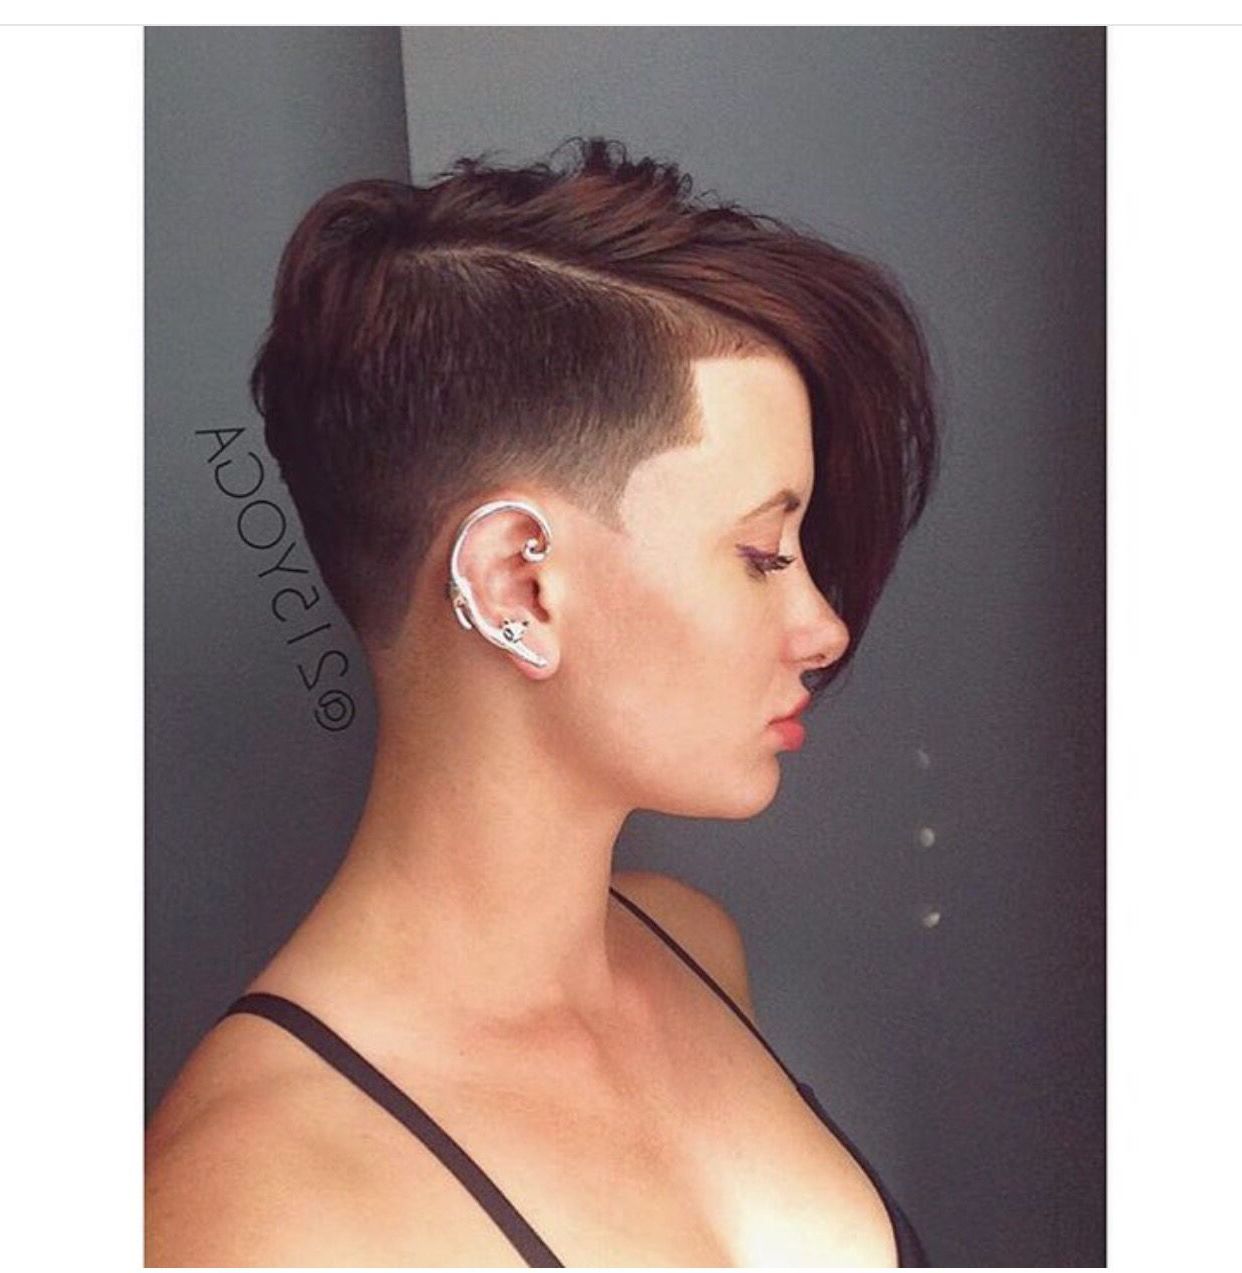 Short Hair Shaved Side | Short Hair Cuts Women | Pinterest | Short Throughout Short Hairstyles With Shaved Side (View 9 of 25)